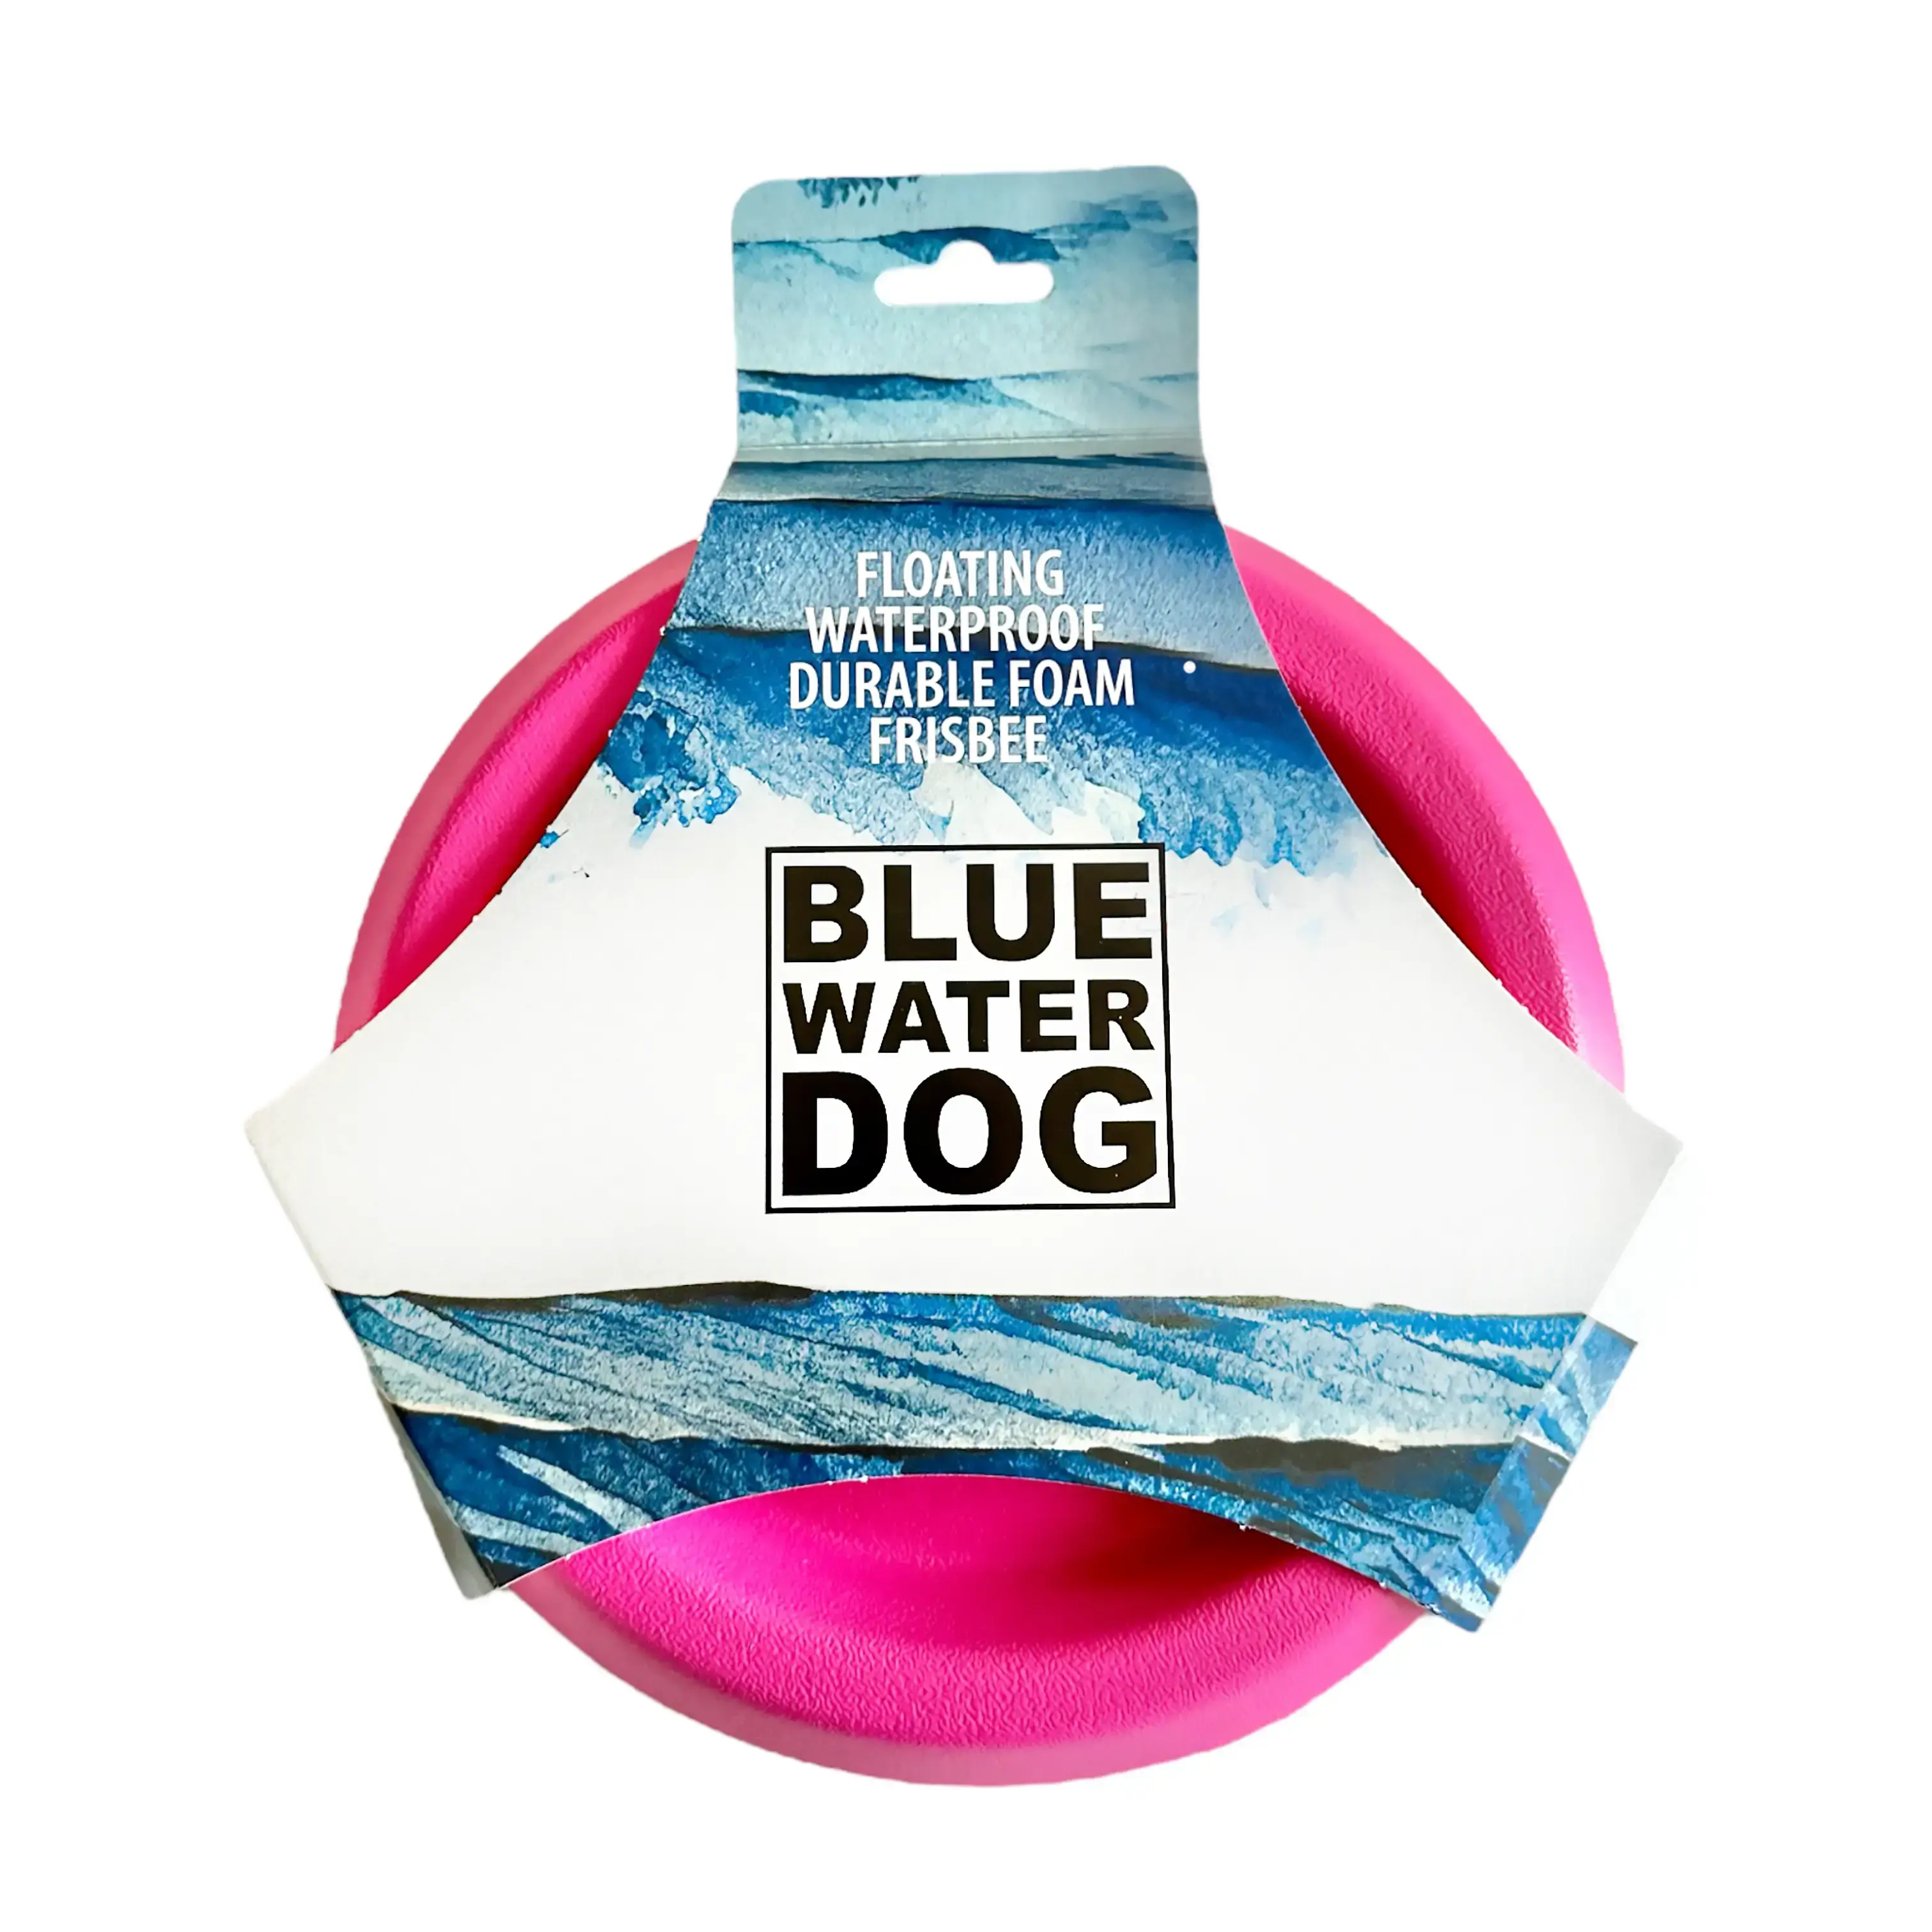 Pink Bluewater Dog frisbee in it's product packaging.